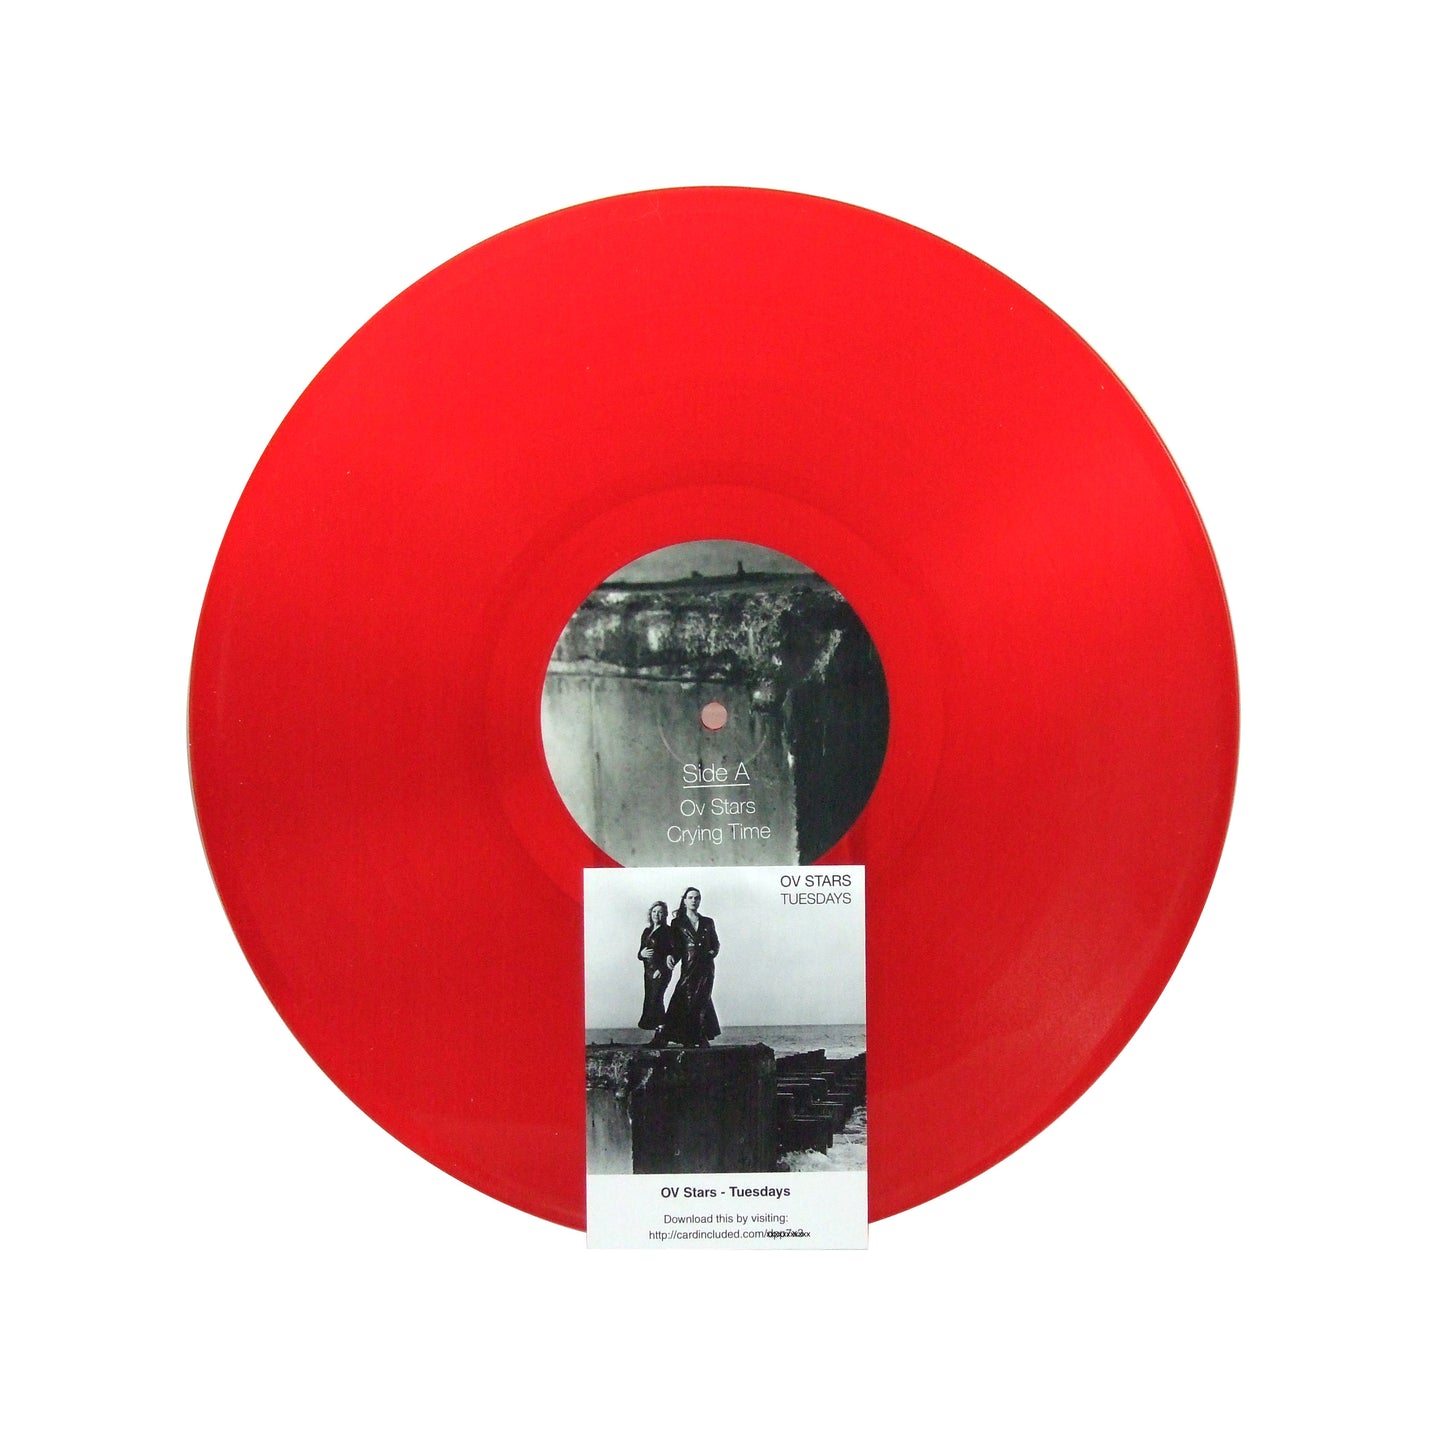 TUESDAYS - by Ov Stars -  Limited Edition Translucent Ruby Red Vinyl EP